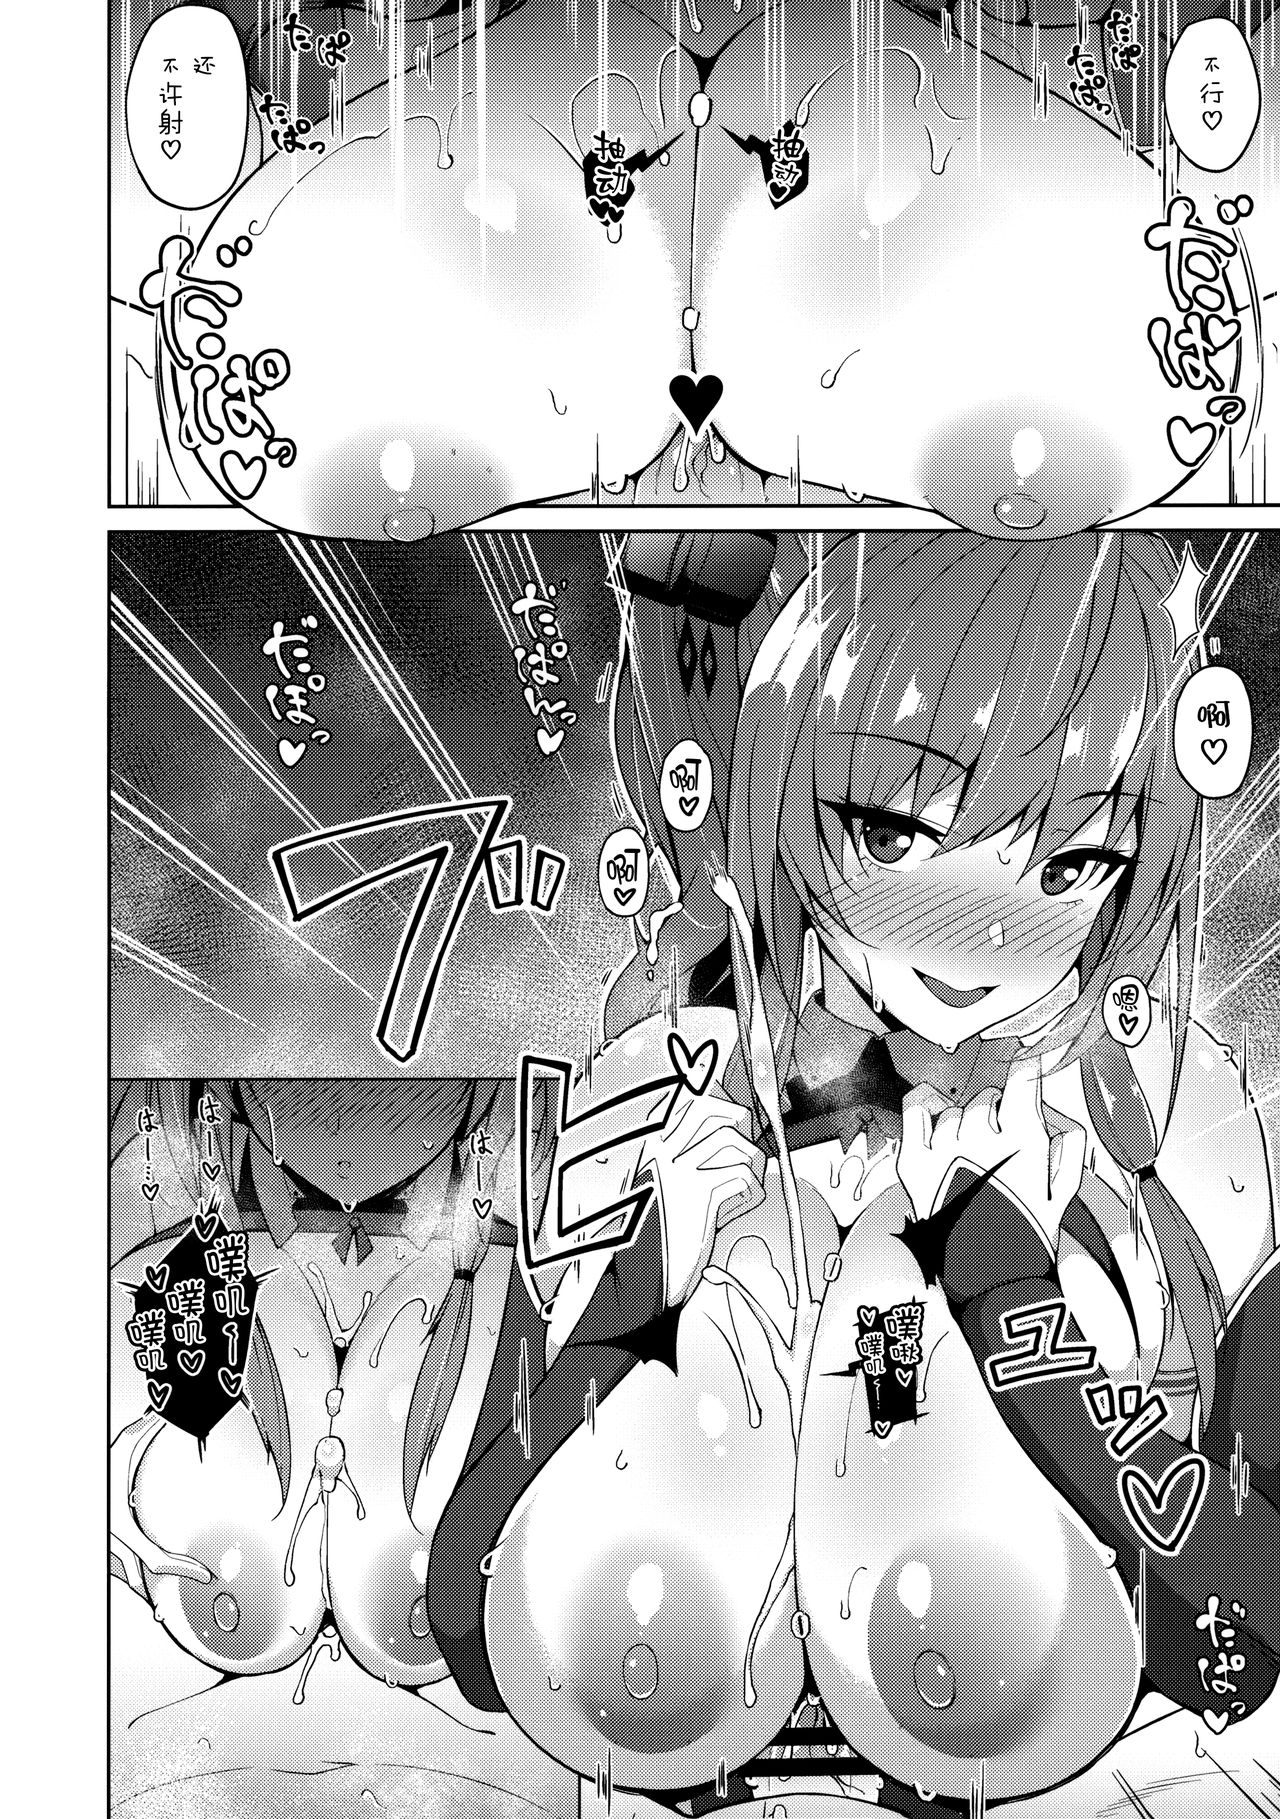 (COMIC1☆15) [Cow Lipid (Fuurai)] LUCKY DISCHARGE (Azur Lane) [Chinese] [无毒汉化组] page 6 full